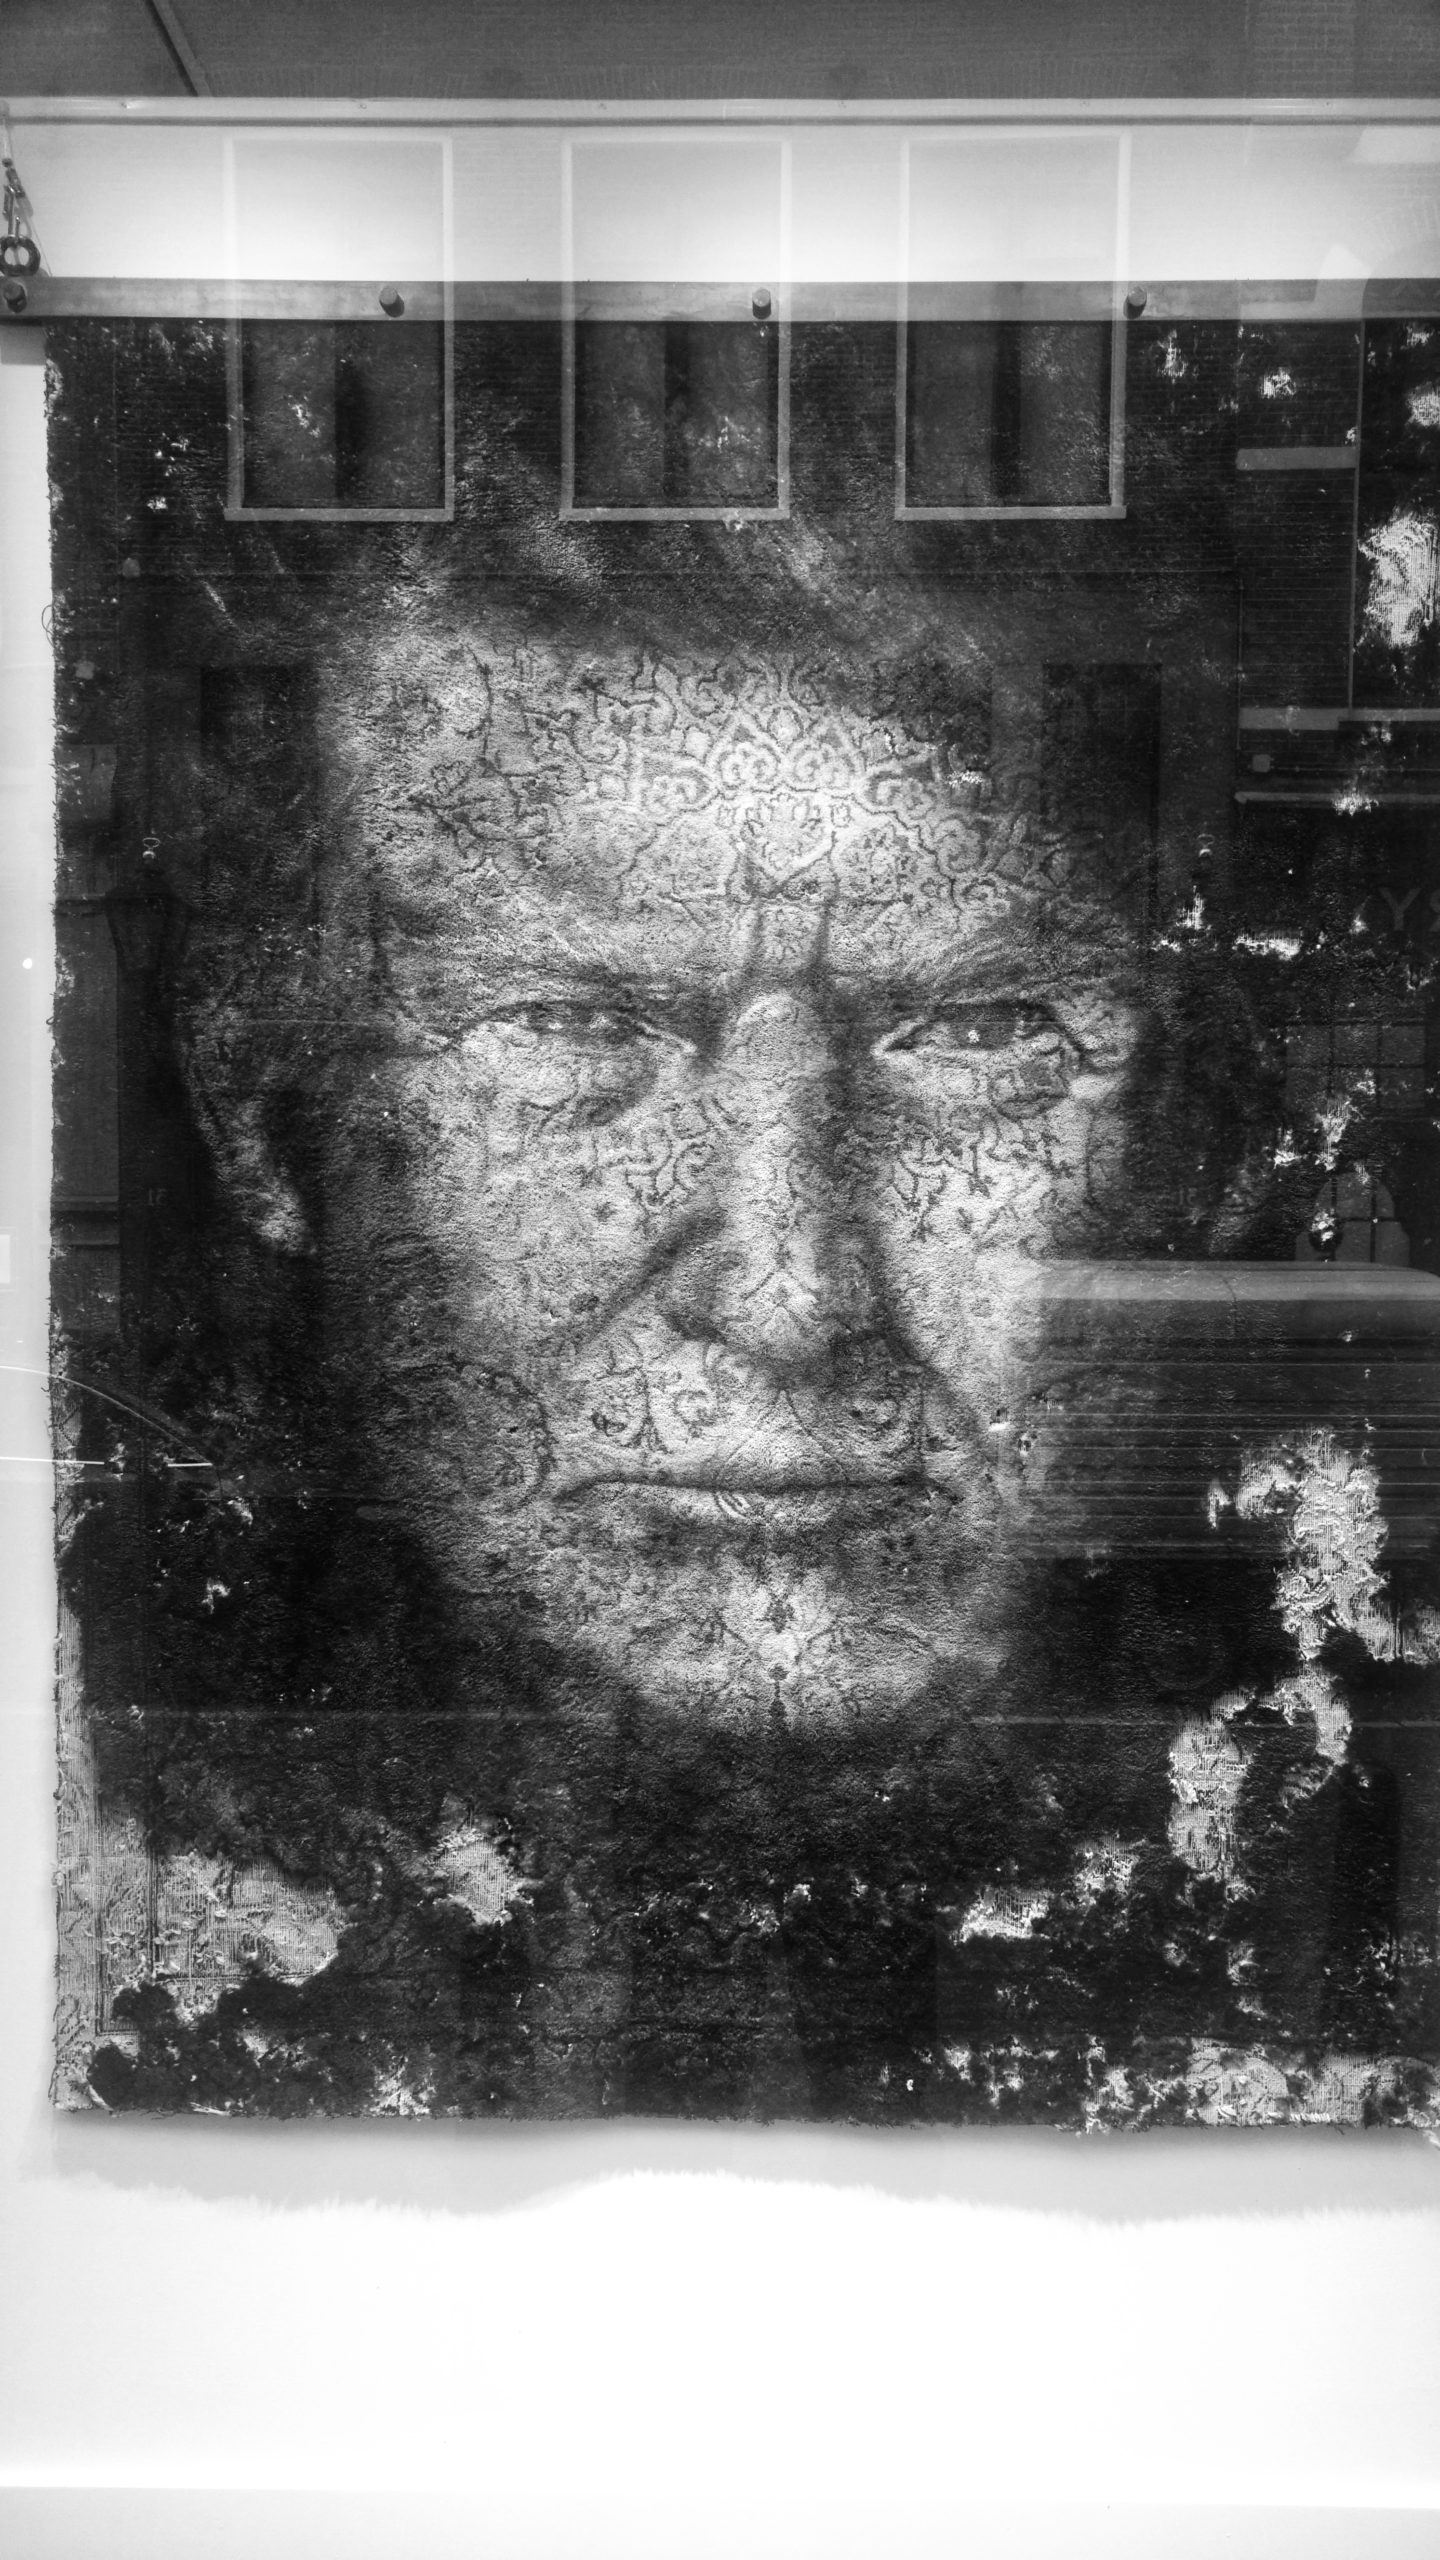 Christiaan Lieverse created this work on the President of the United States, Donald J. Trump named Paradise Corroded.  